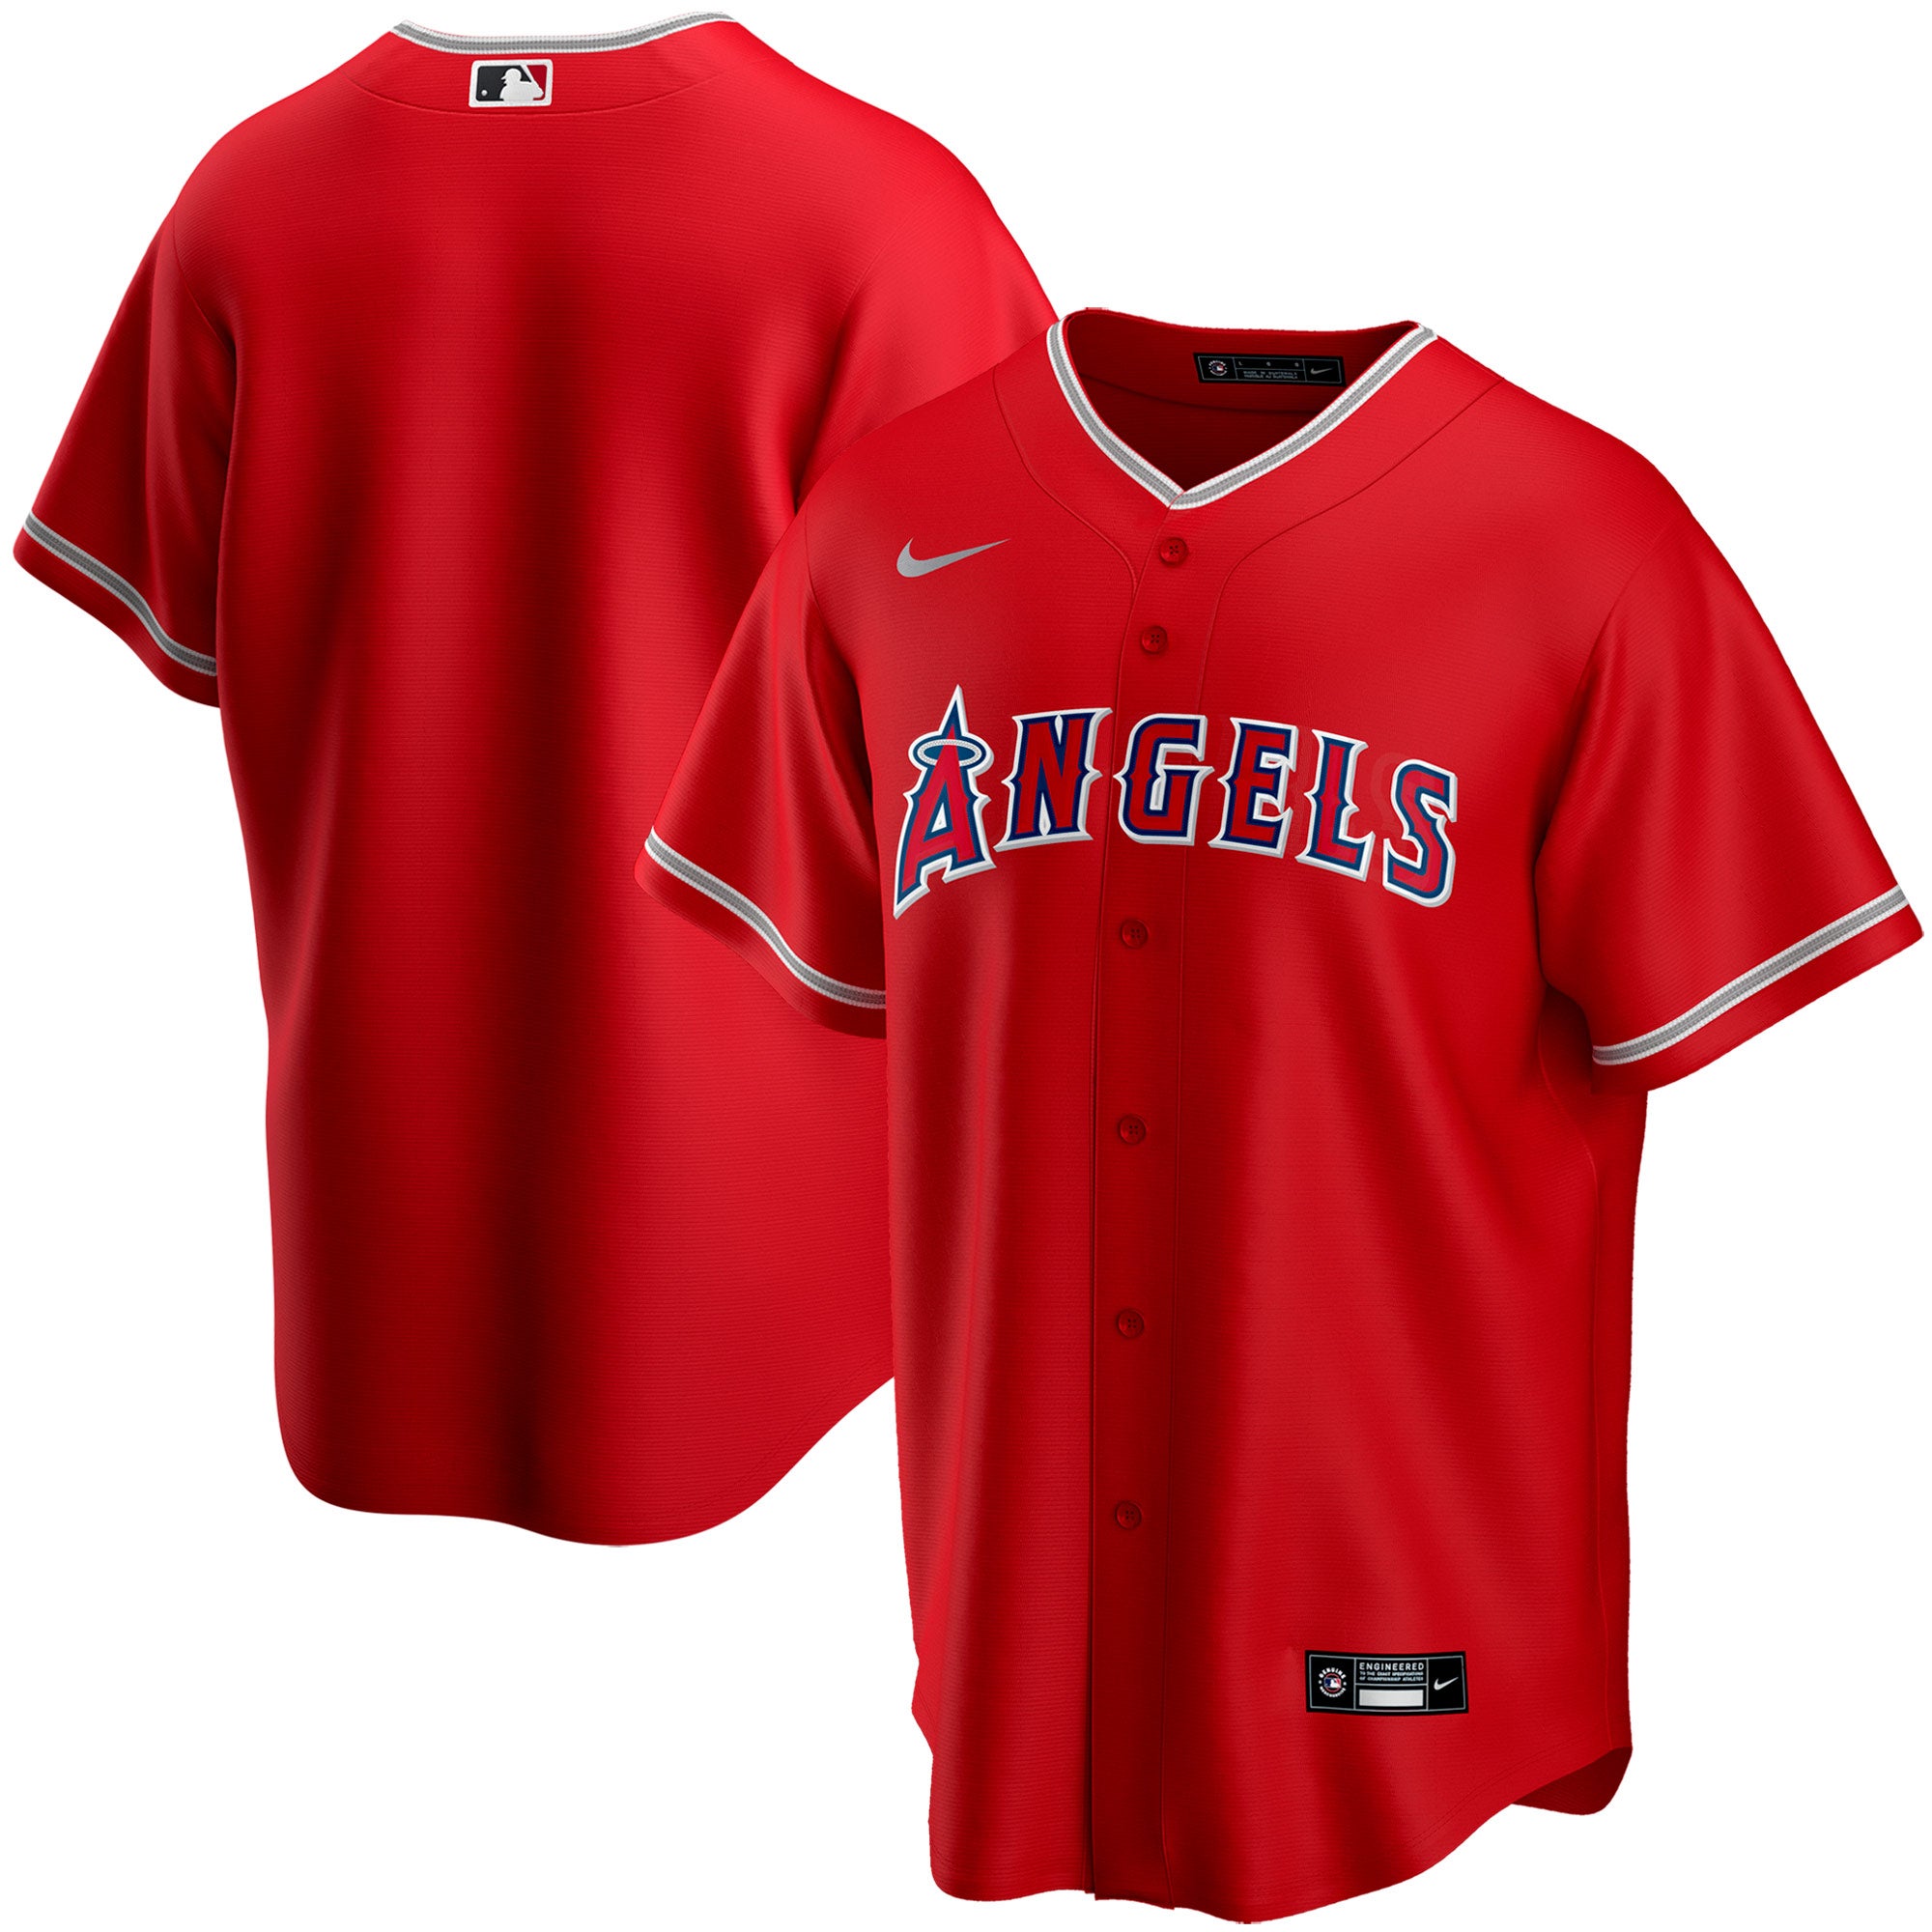 jcpenney astros jersey